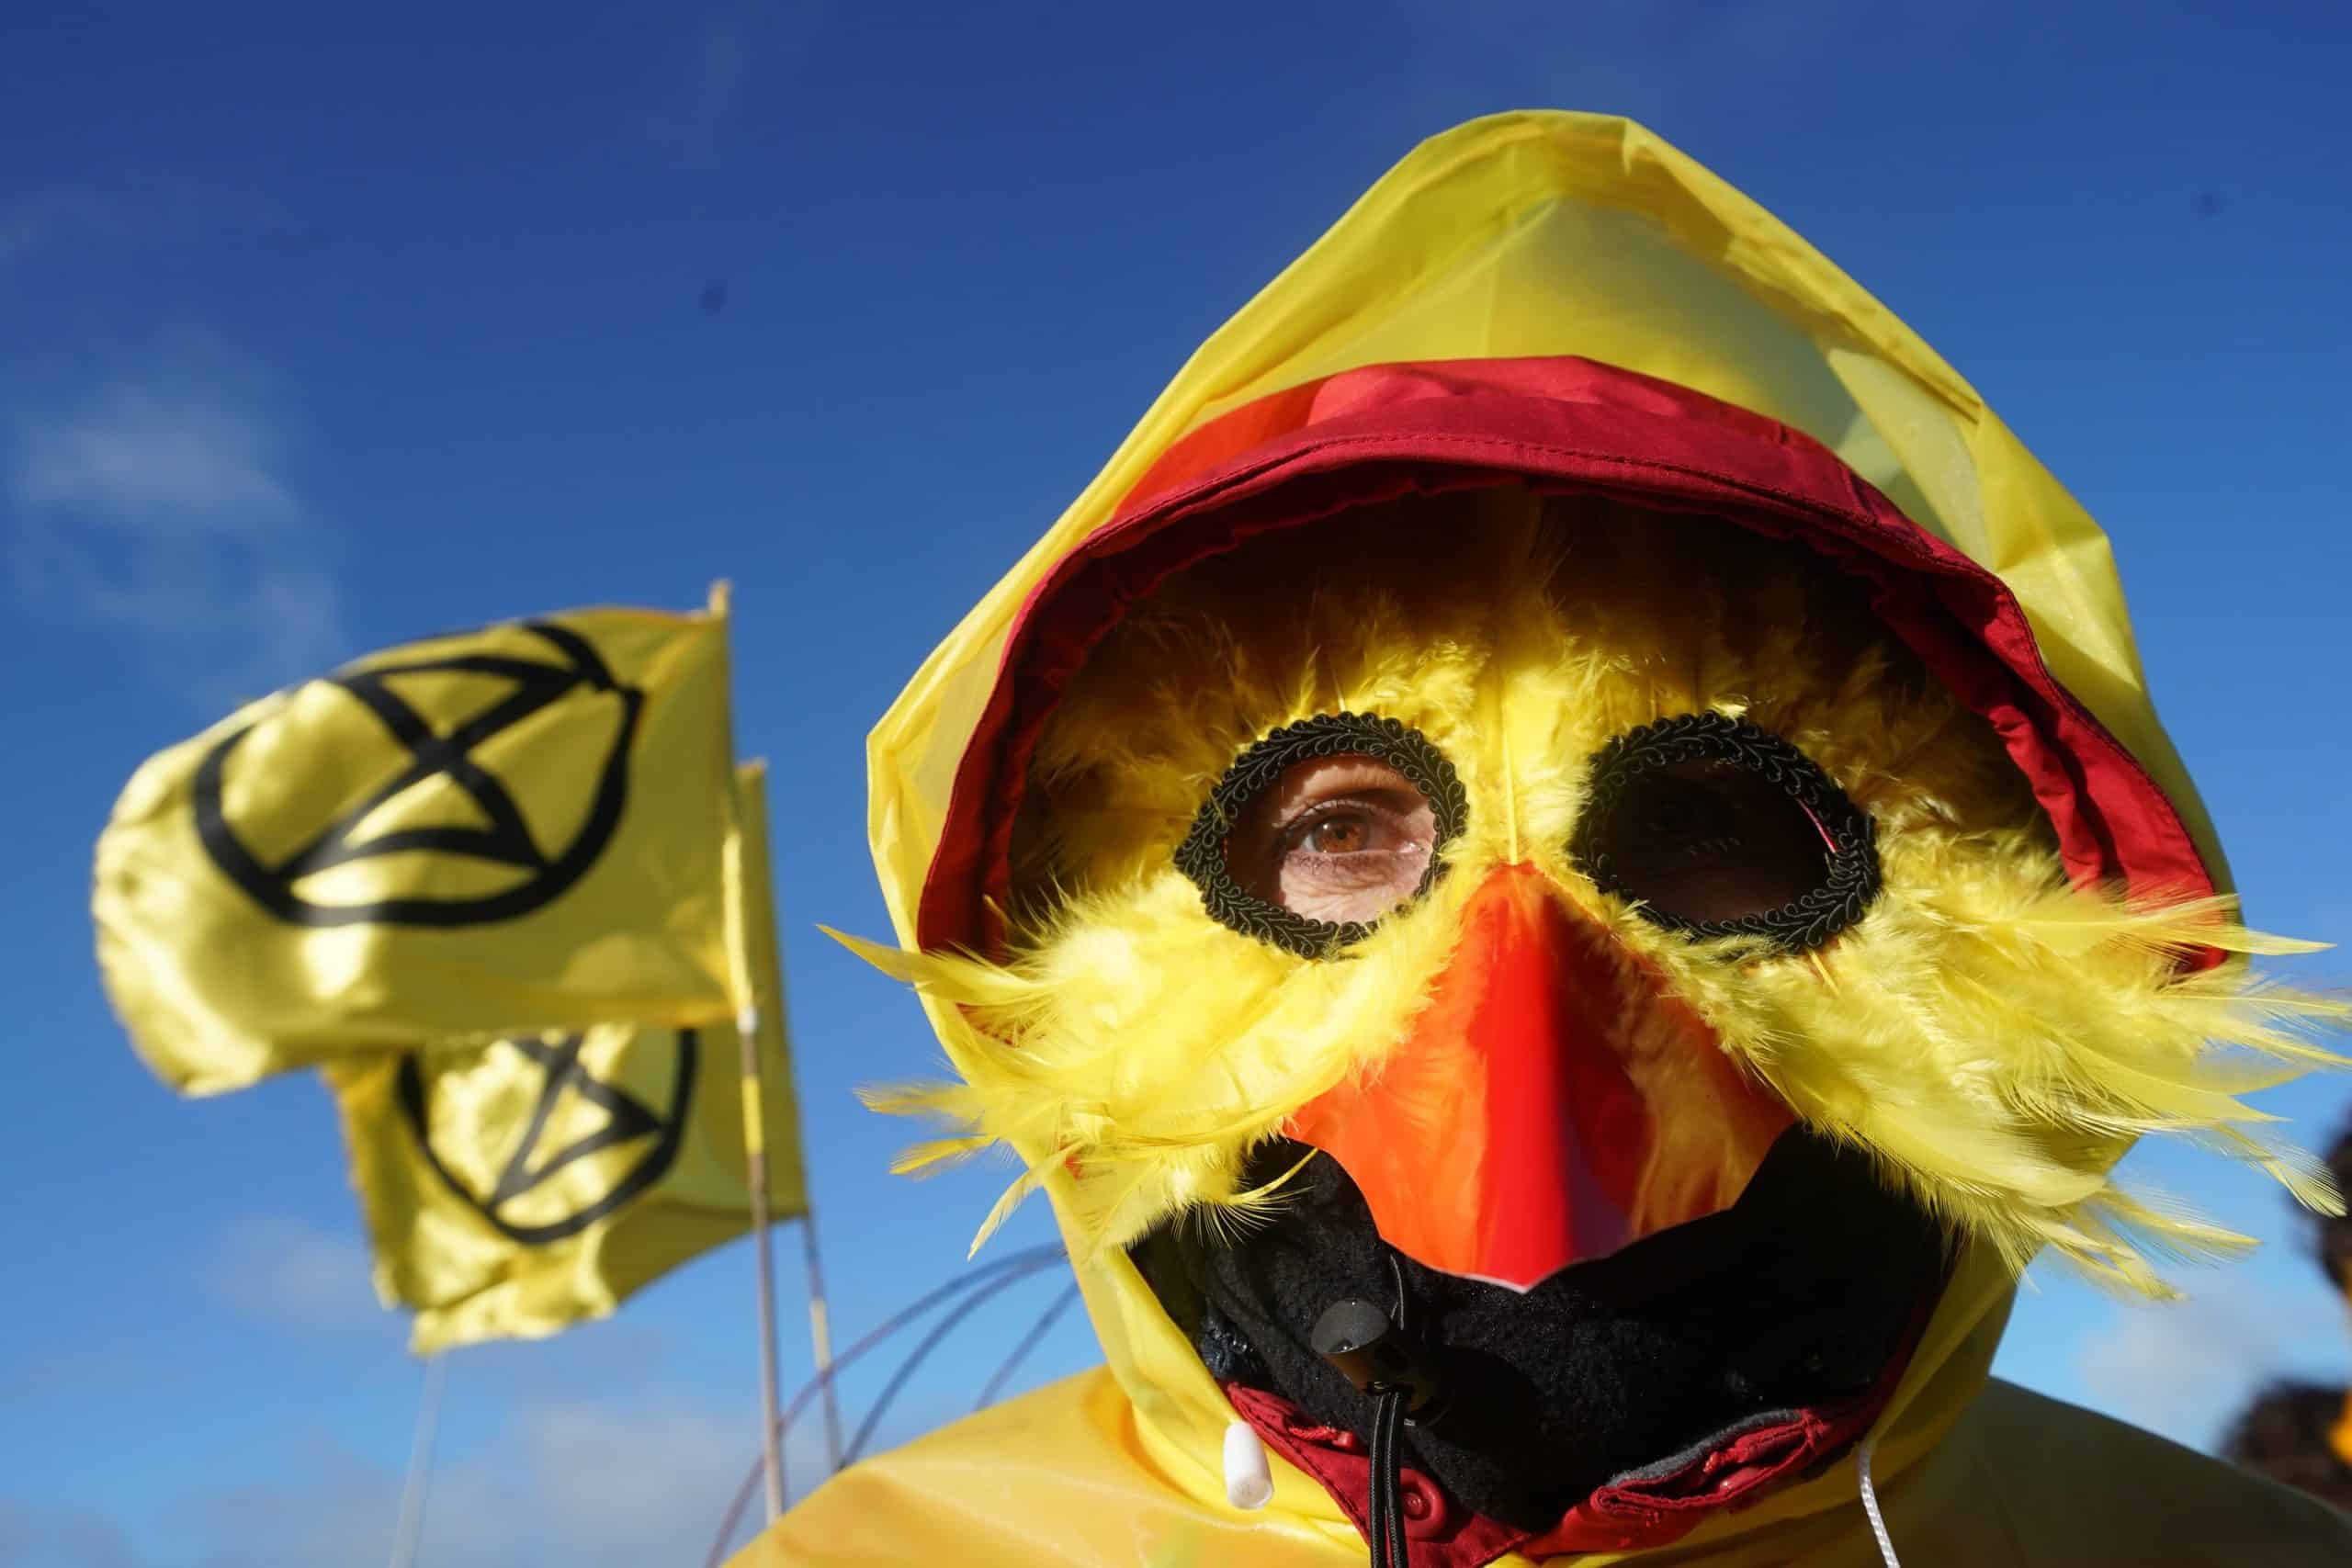 Mining group hits back at ‘privileged’ Extinction Rebellion canary protesters